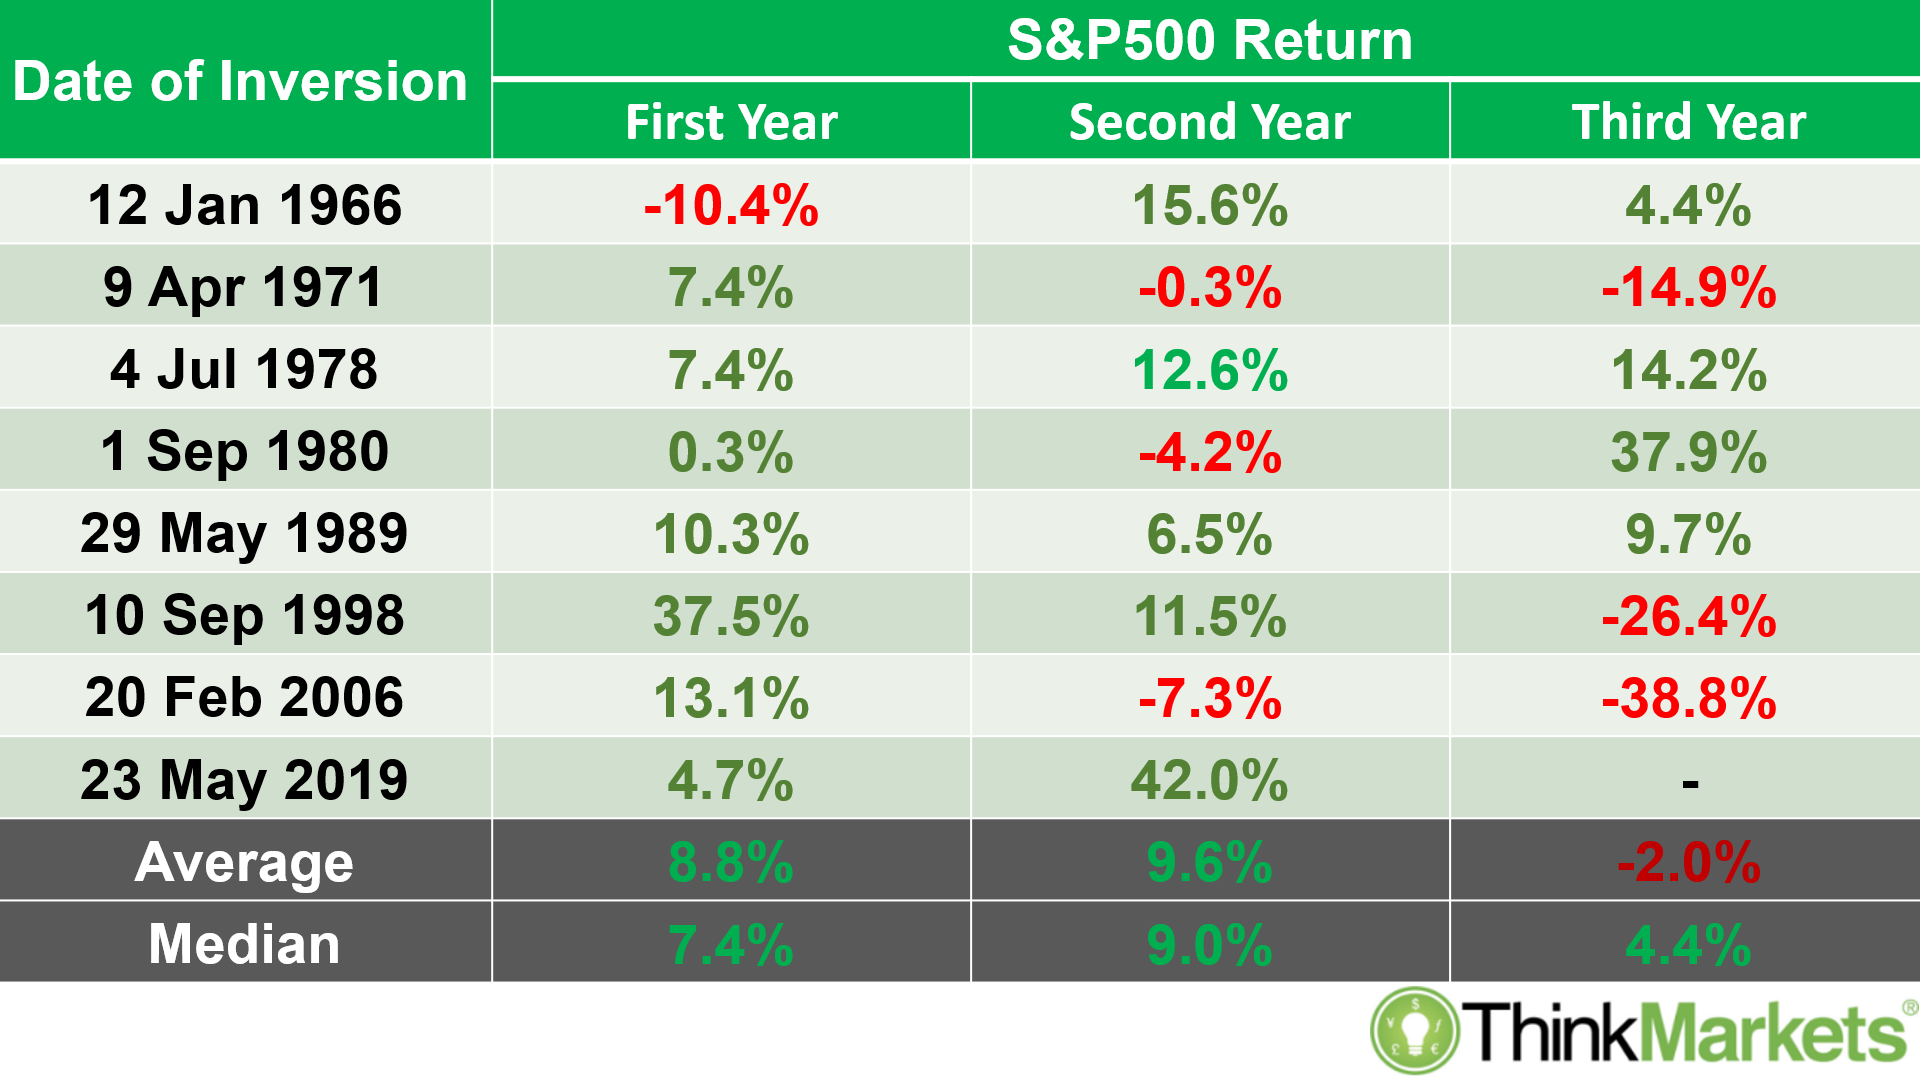 S&P500 returns after 3-month vs 10-year Treasury yield curve inversion